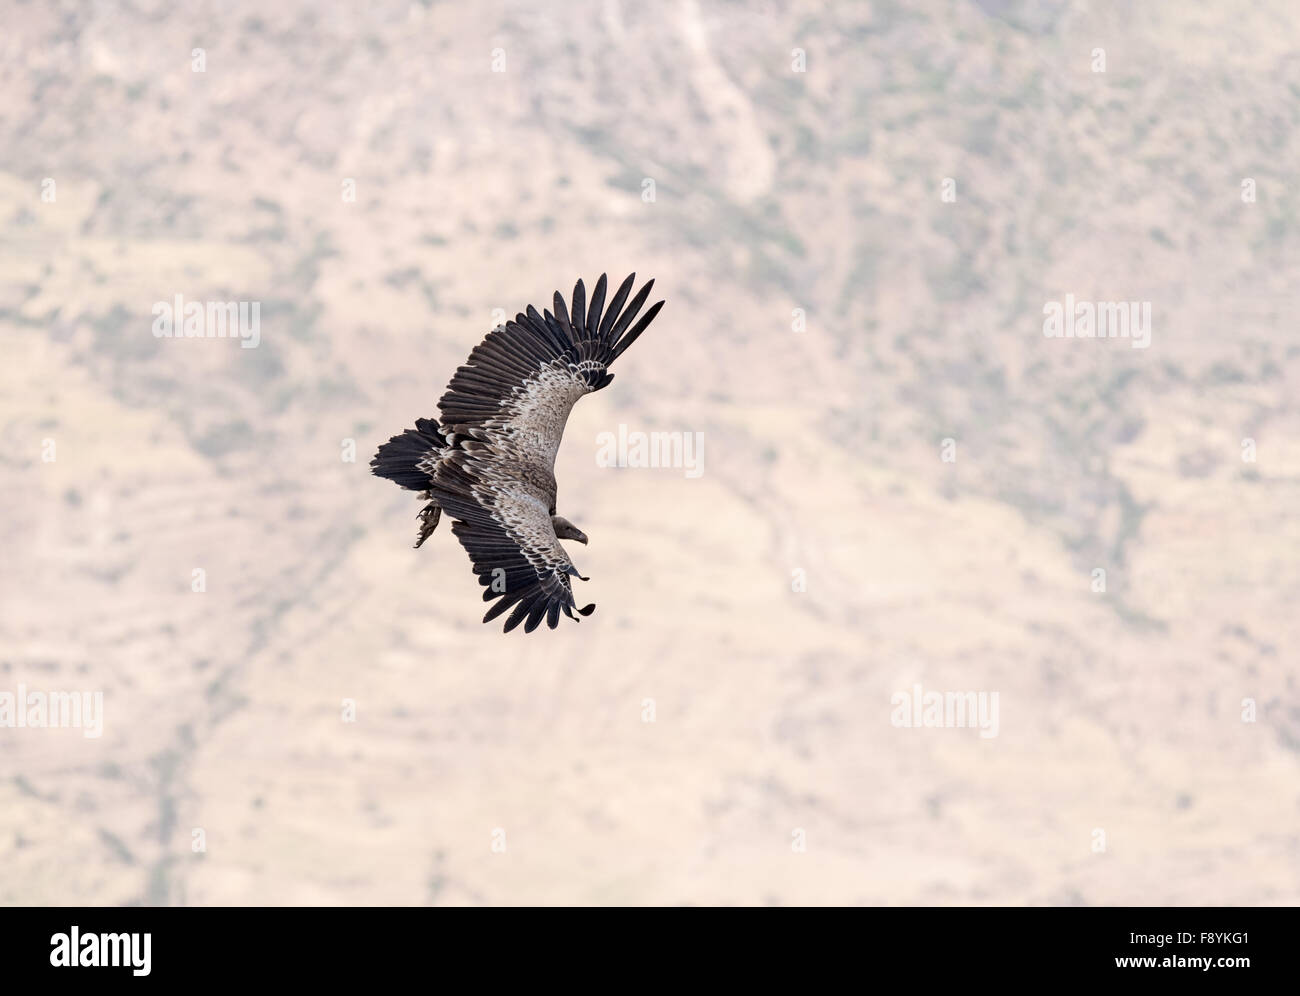 A upper side of a Ruppell's Griffin Vulture against the backdrop of the Jemma Valley below the bird Stock Photo